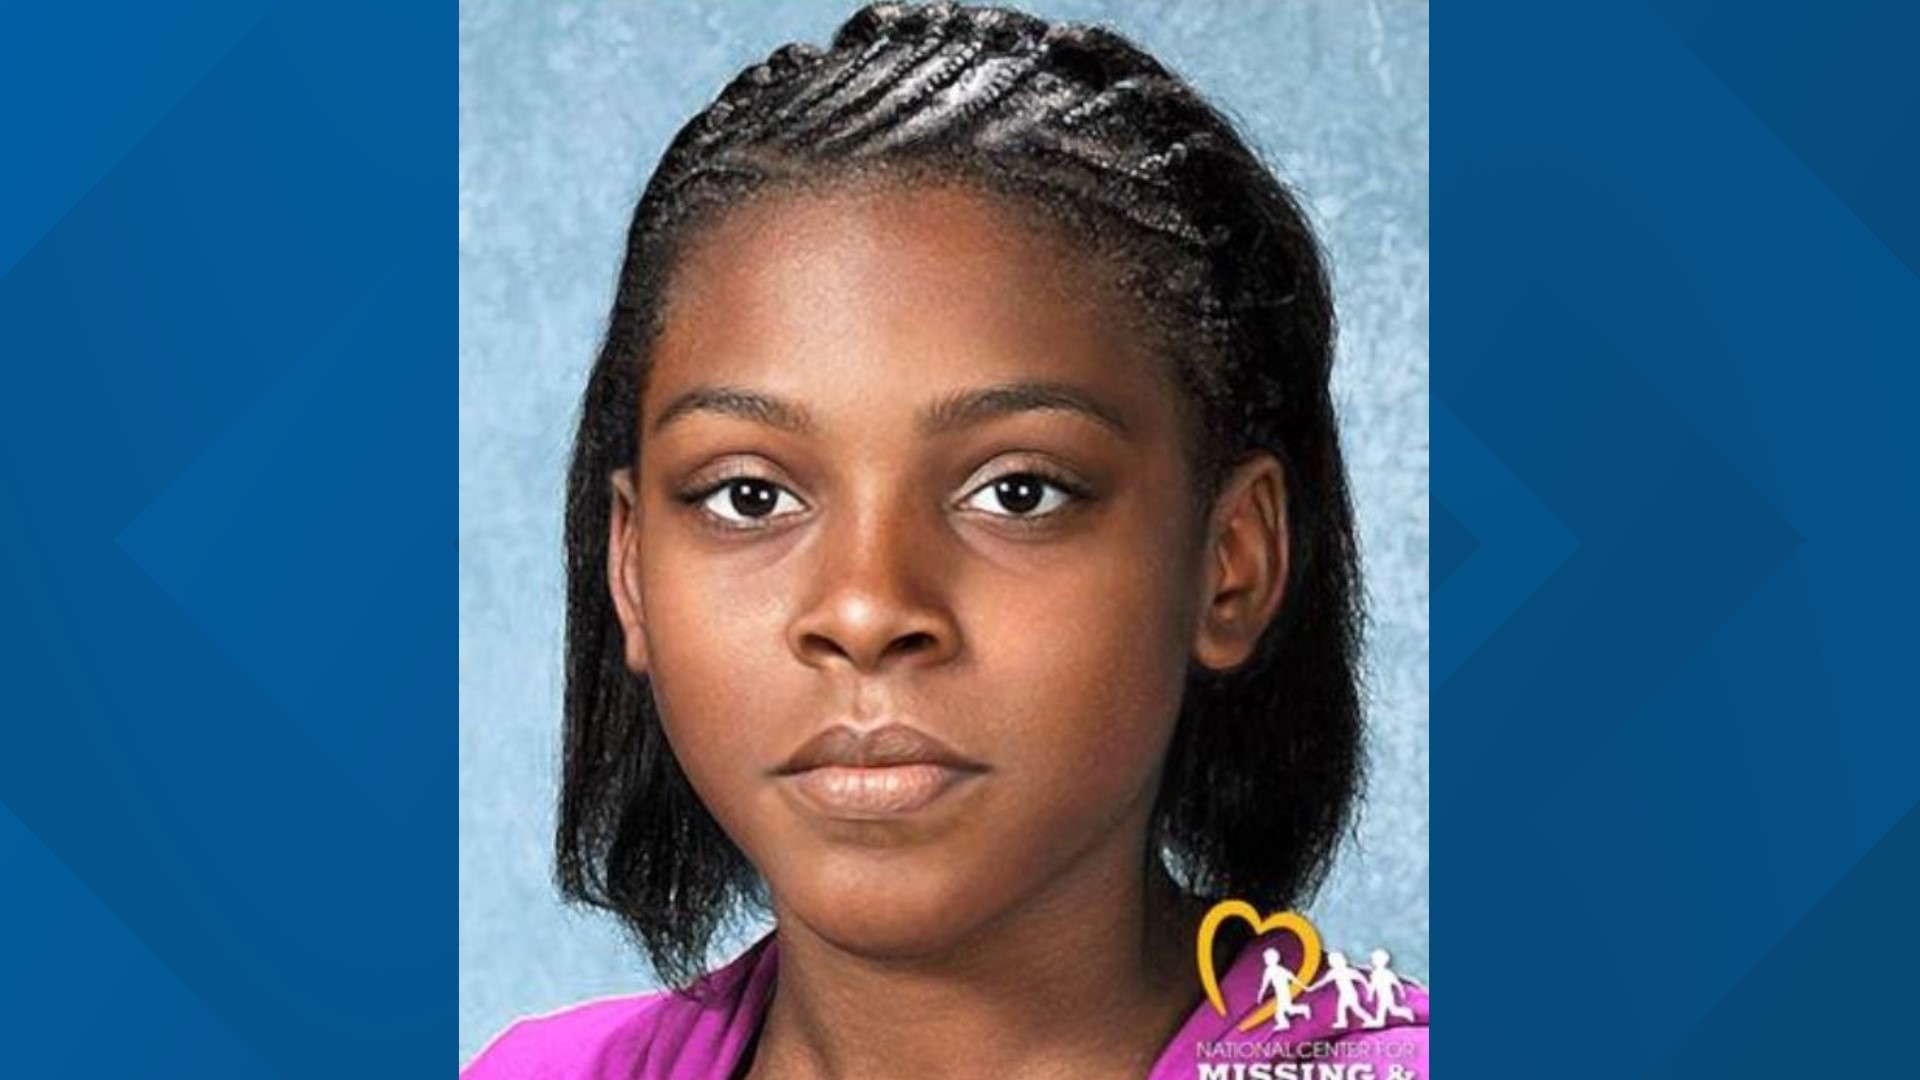 It has been seven years since the then 8-year-old Relisha Rudd went missing from a DC homeless shelter.